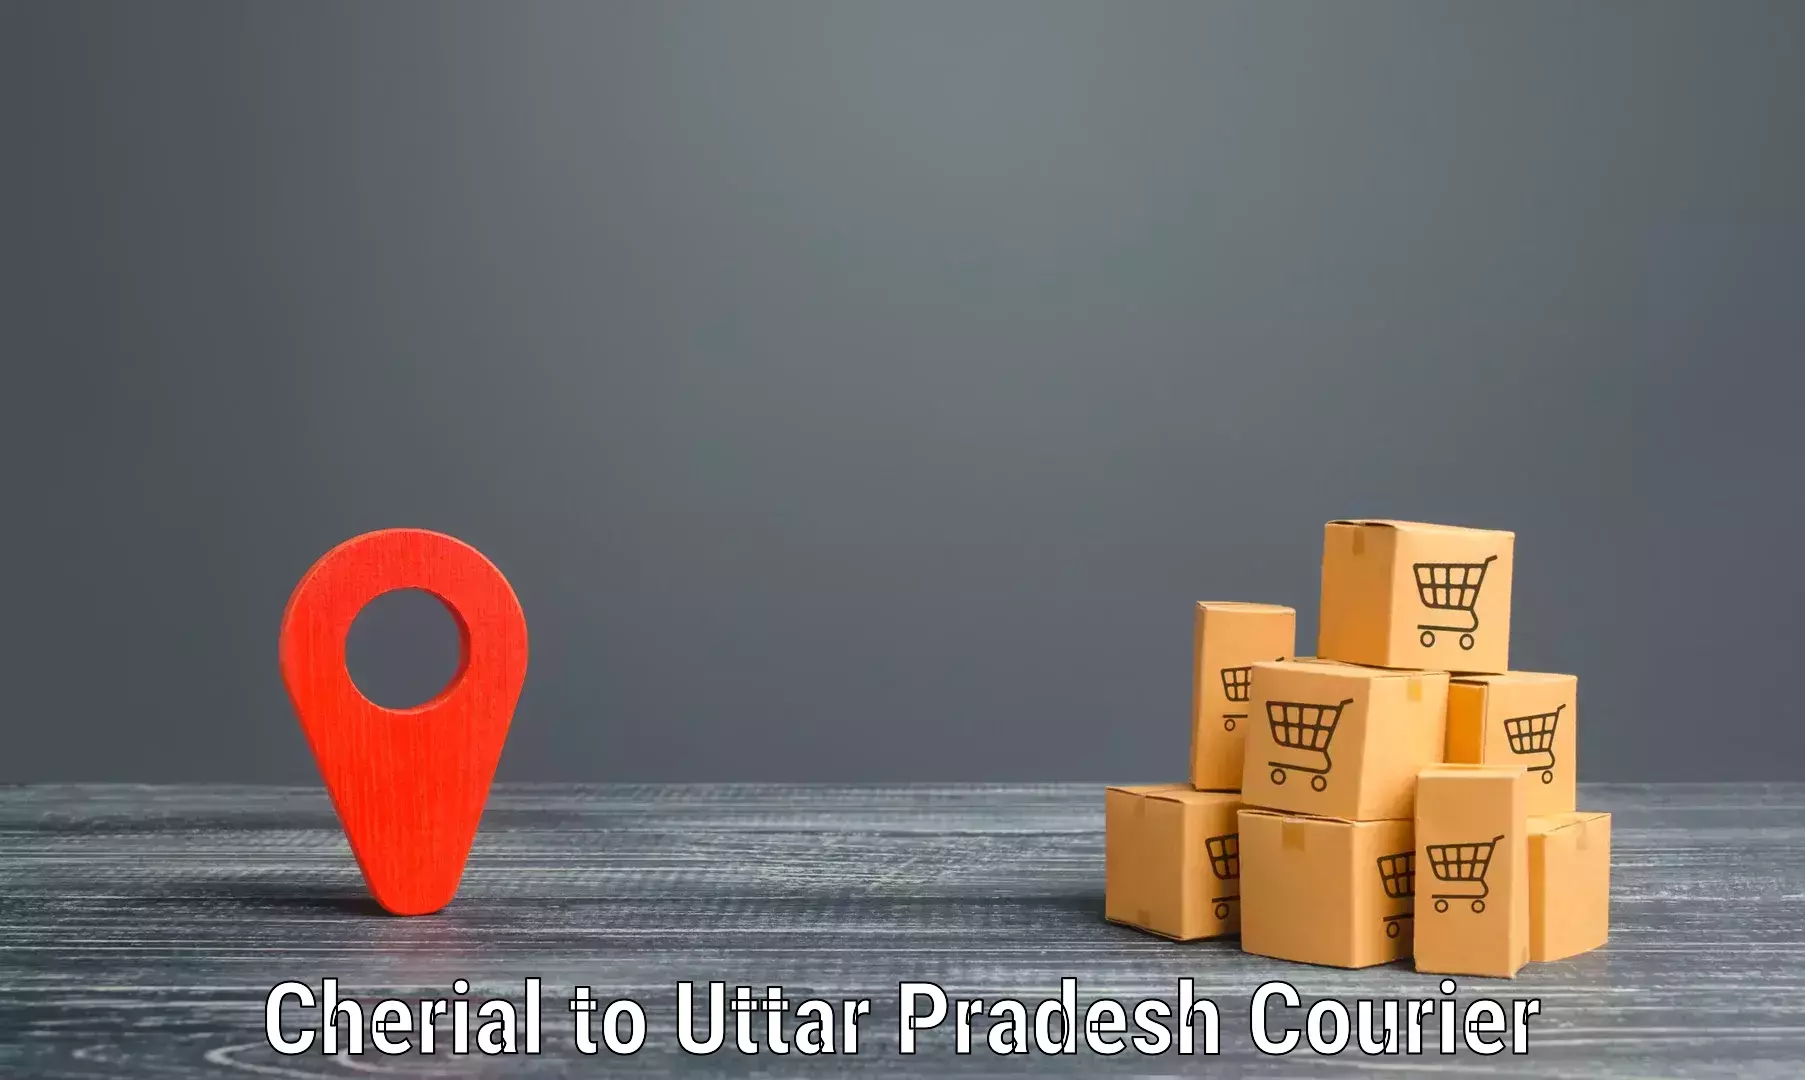 Seamless shipping experience in Cherial to Lucknow